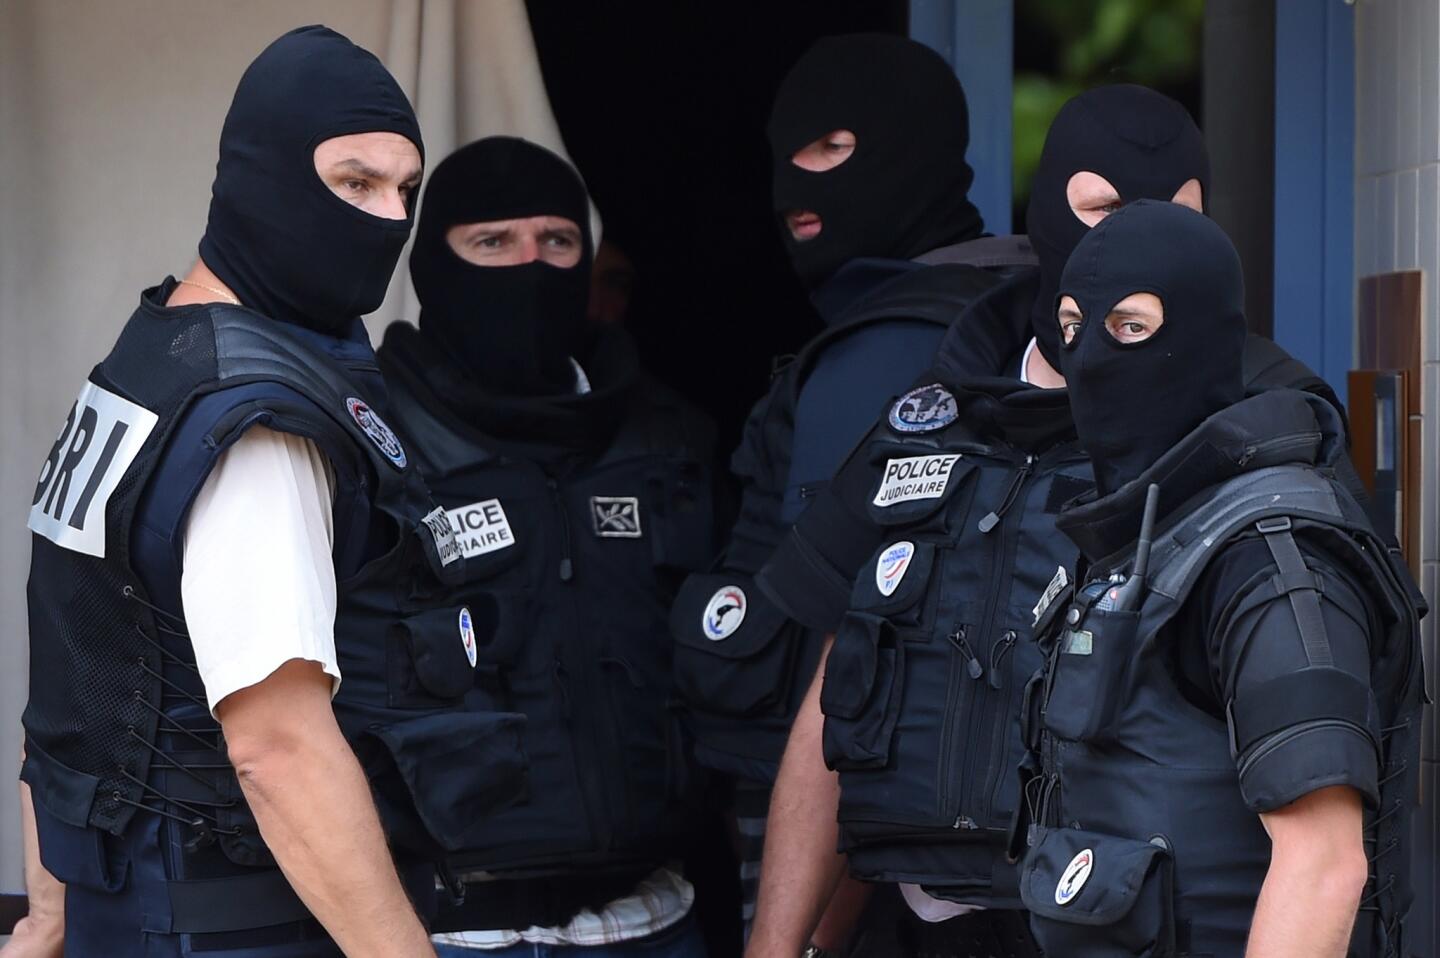 Members of a French special forces team in Saint-Priest, France, stand outside the apartment of a man suspected of carrying out an attack near Lyon.